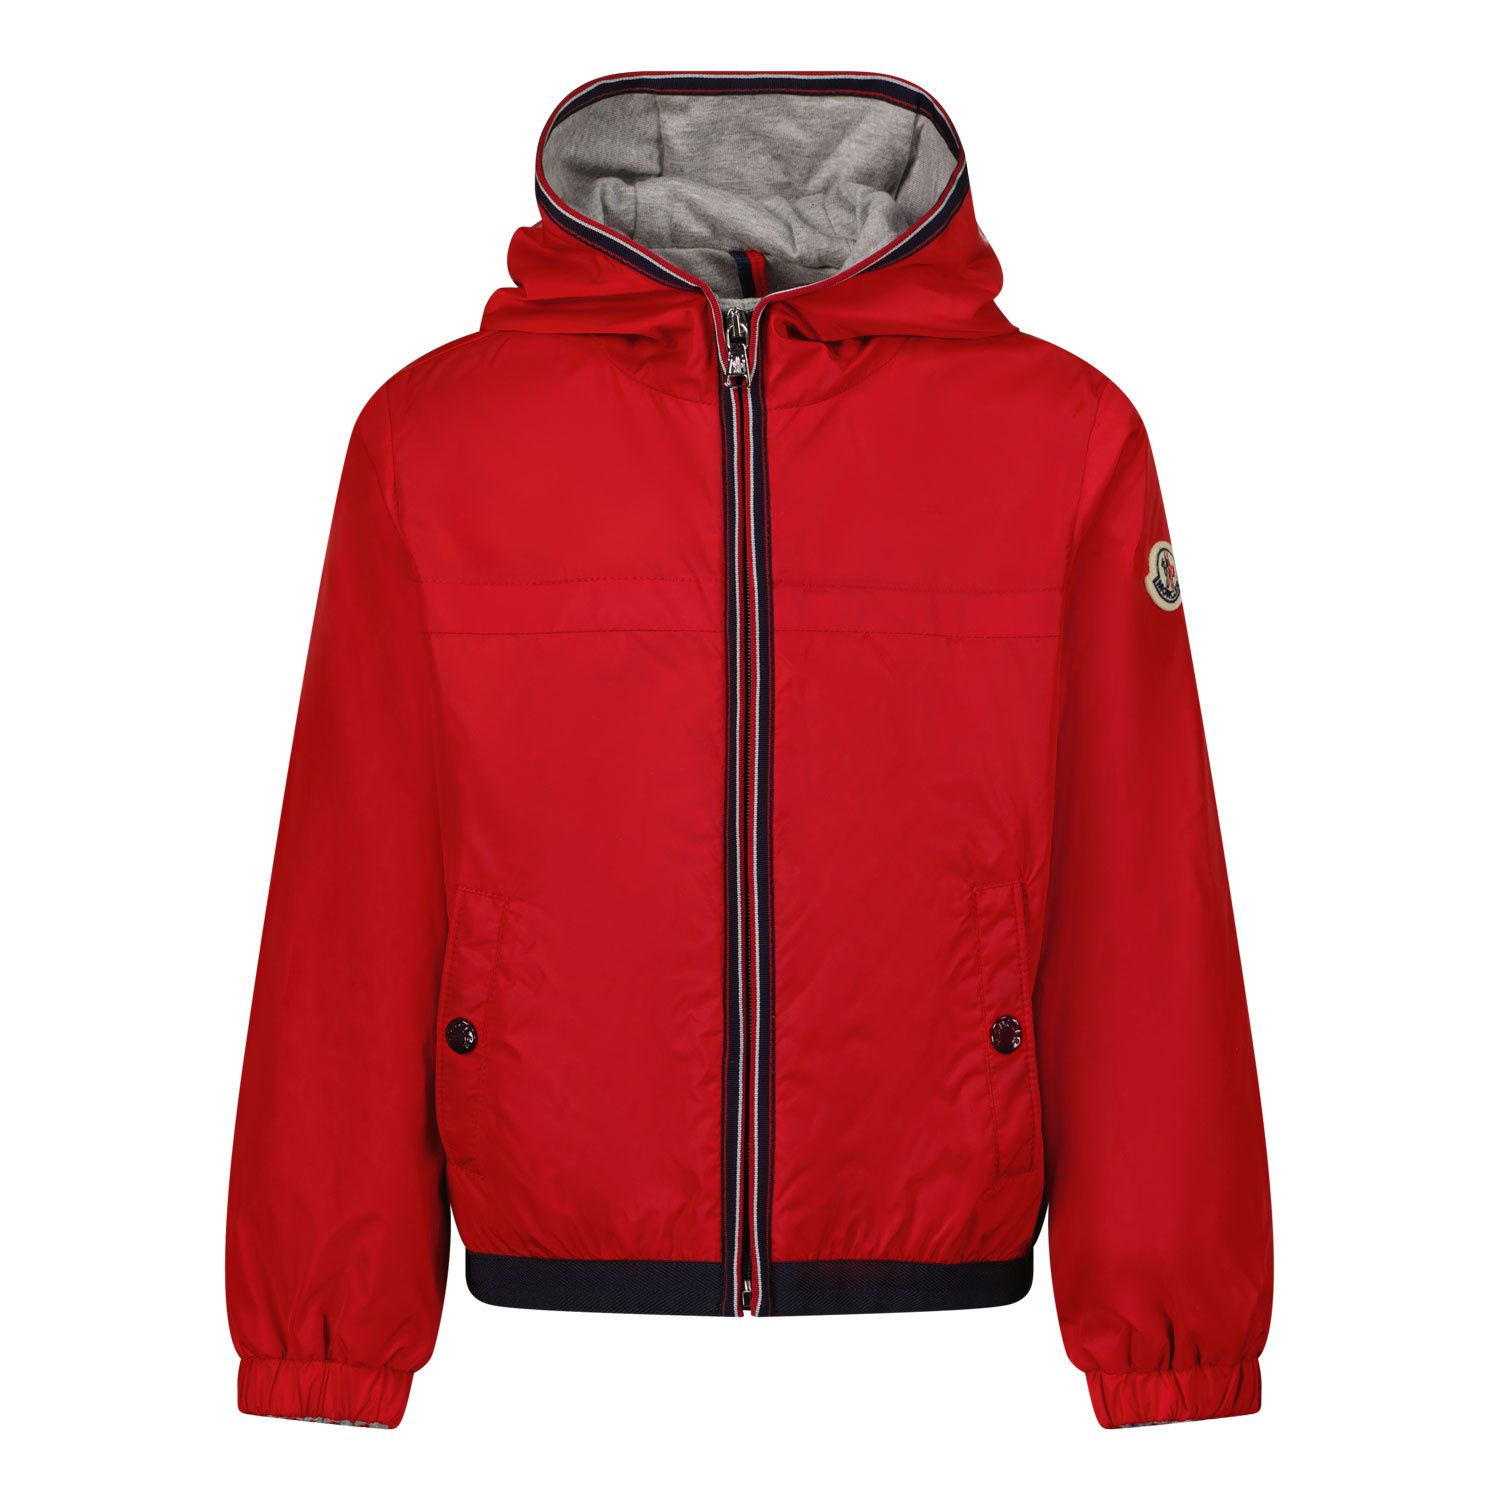 Picture of Moncler 1A00029 baby coat red